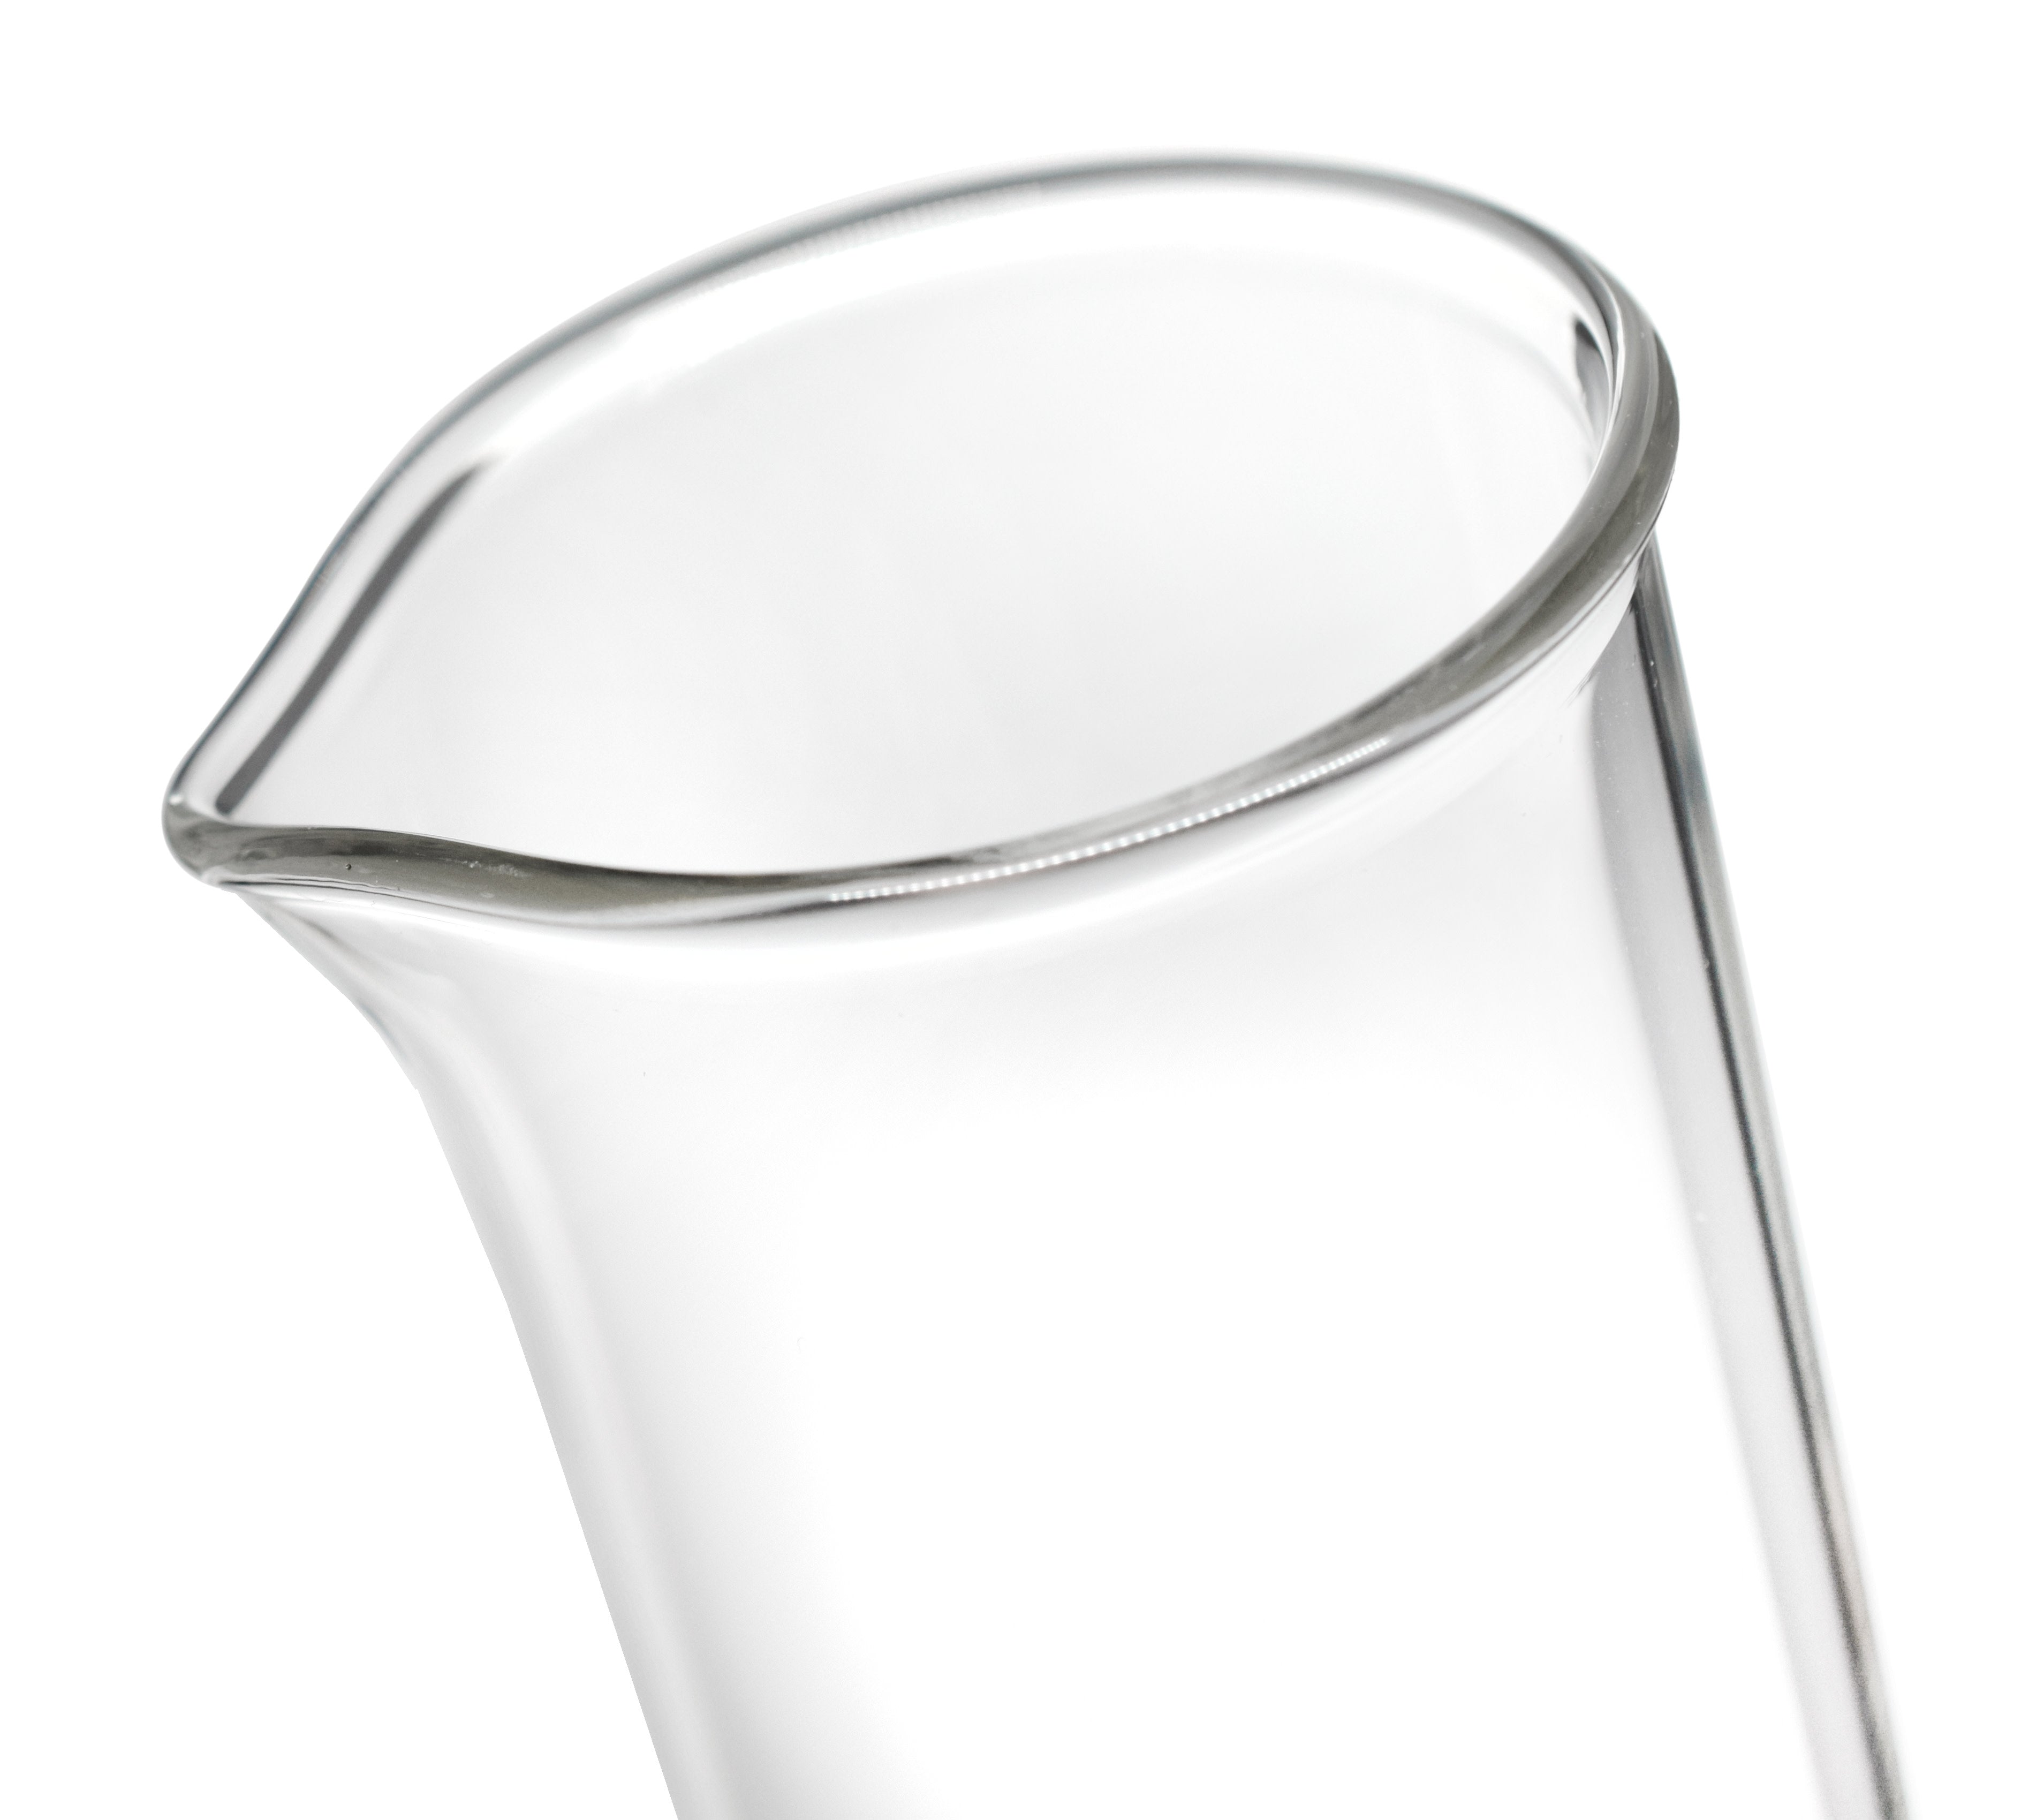 Borosilicate Glass Graduated Cylinder with Guard, 10 ml, 0.2 ml Graduation, Class A, ASTM, Autoclavable